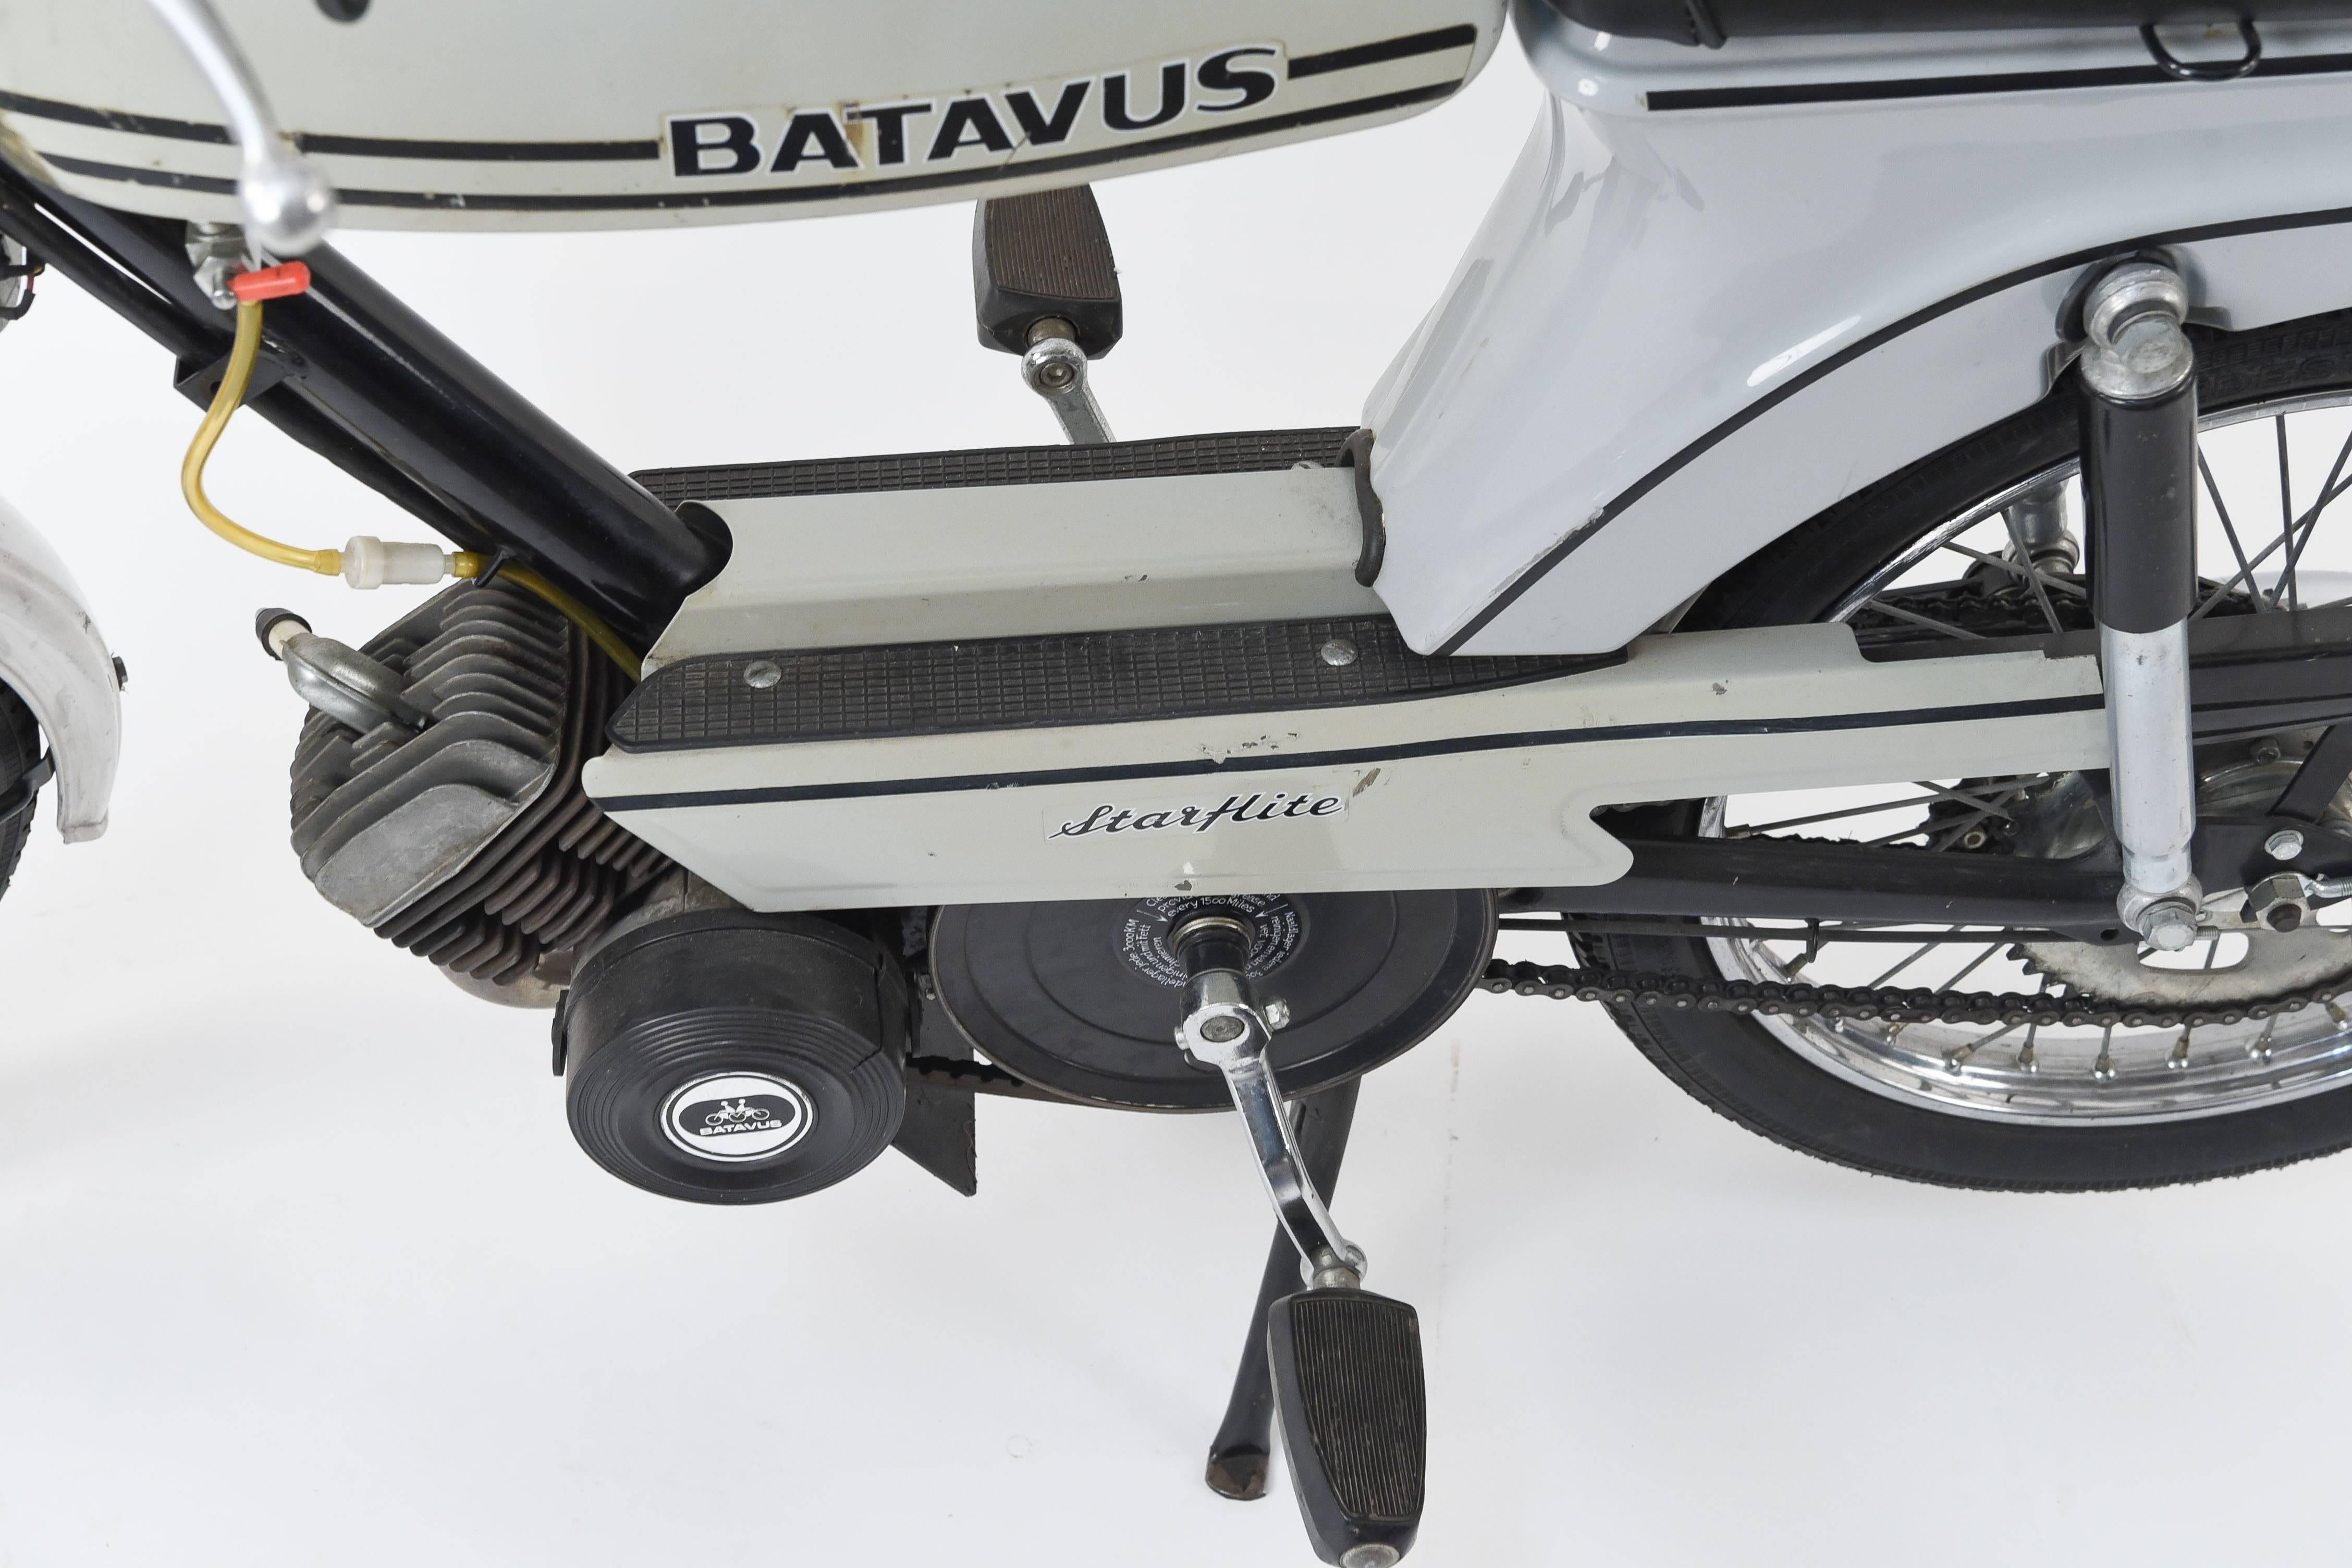 Travel in style with this Batavus Starflite moped! In working condition, but in need of tune up. Can be used as a moped or fun decorative prop for an interior.